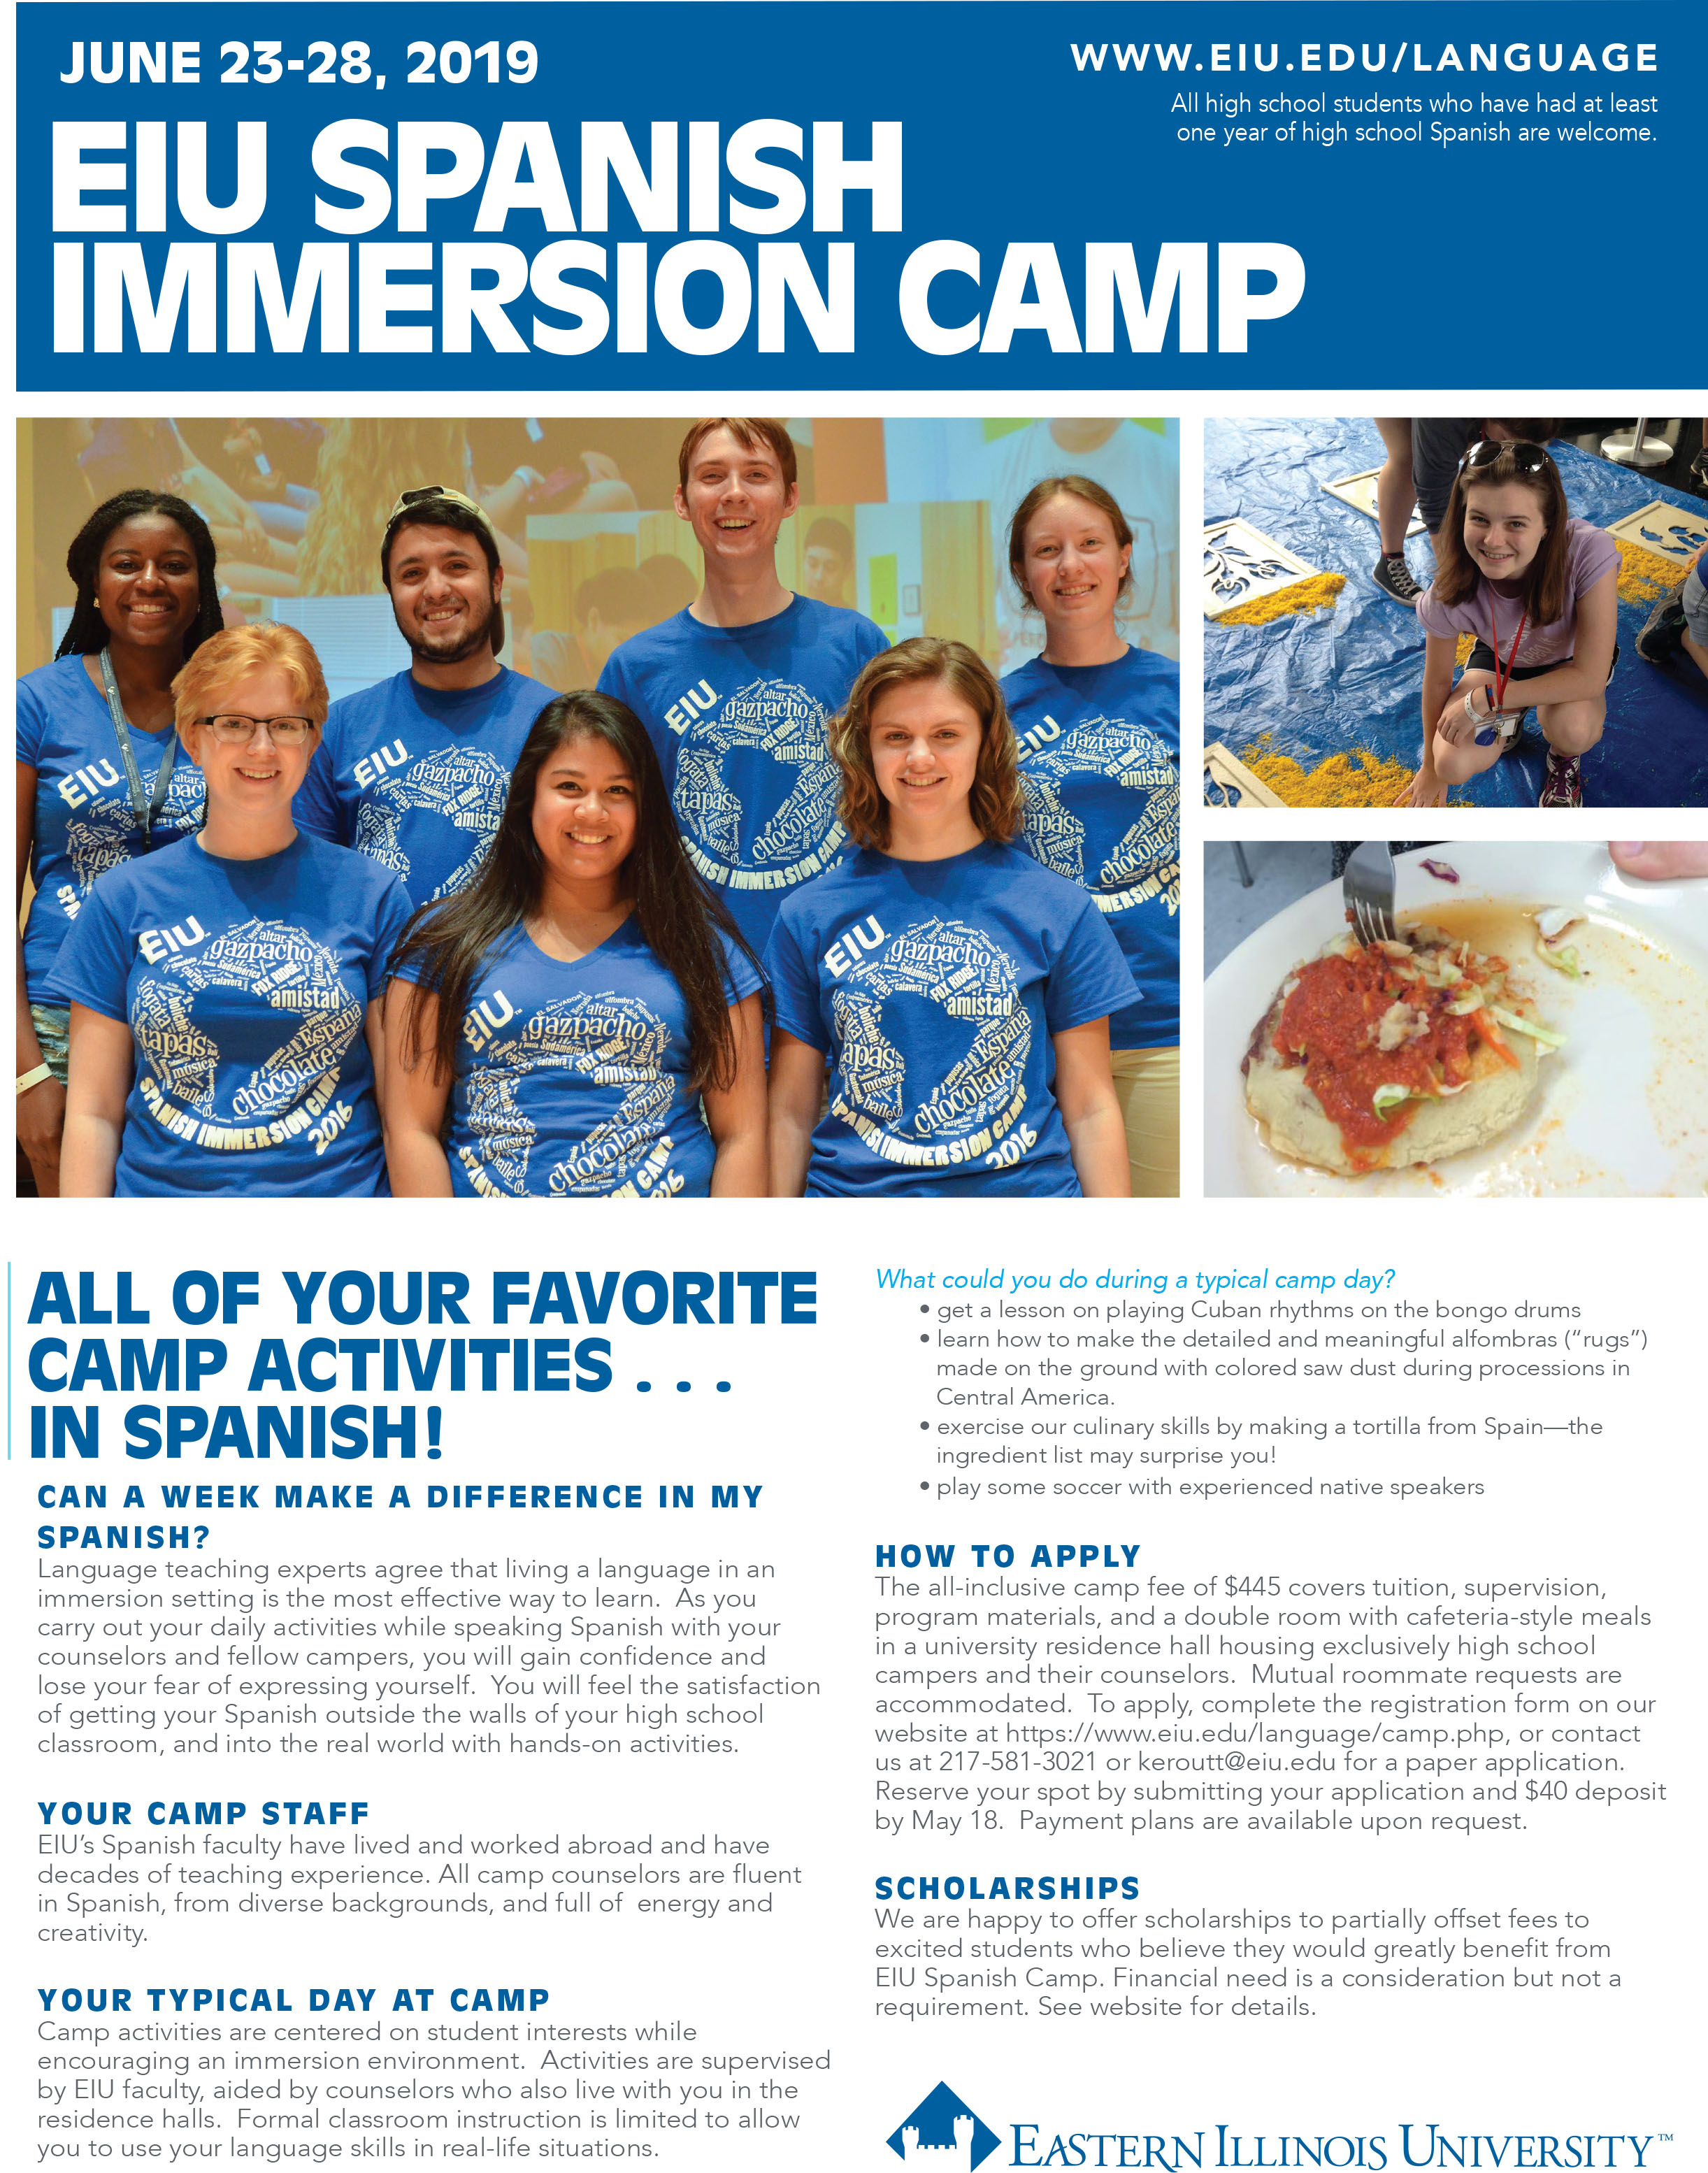 Spanish Immersion Camp 2019